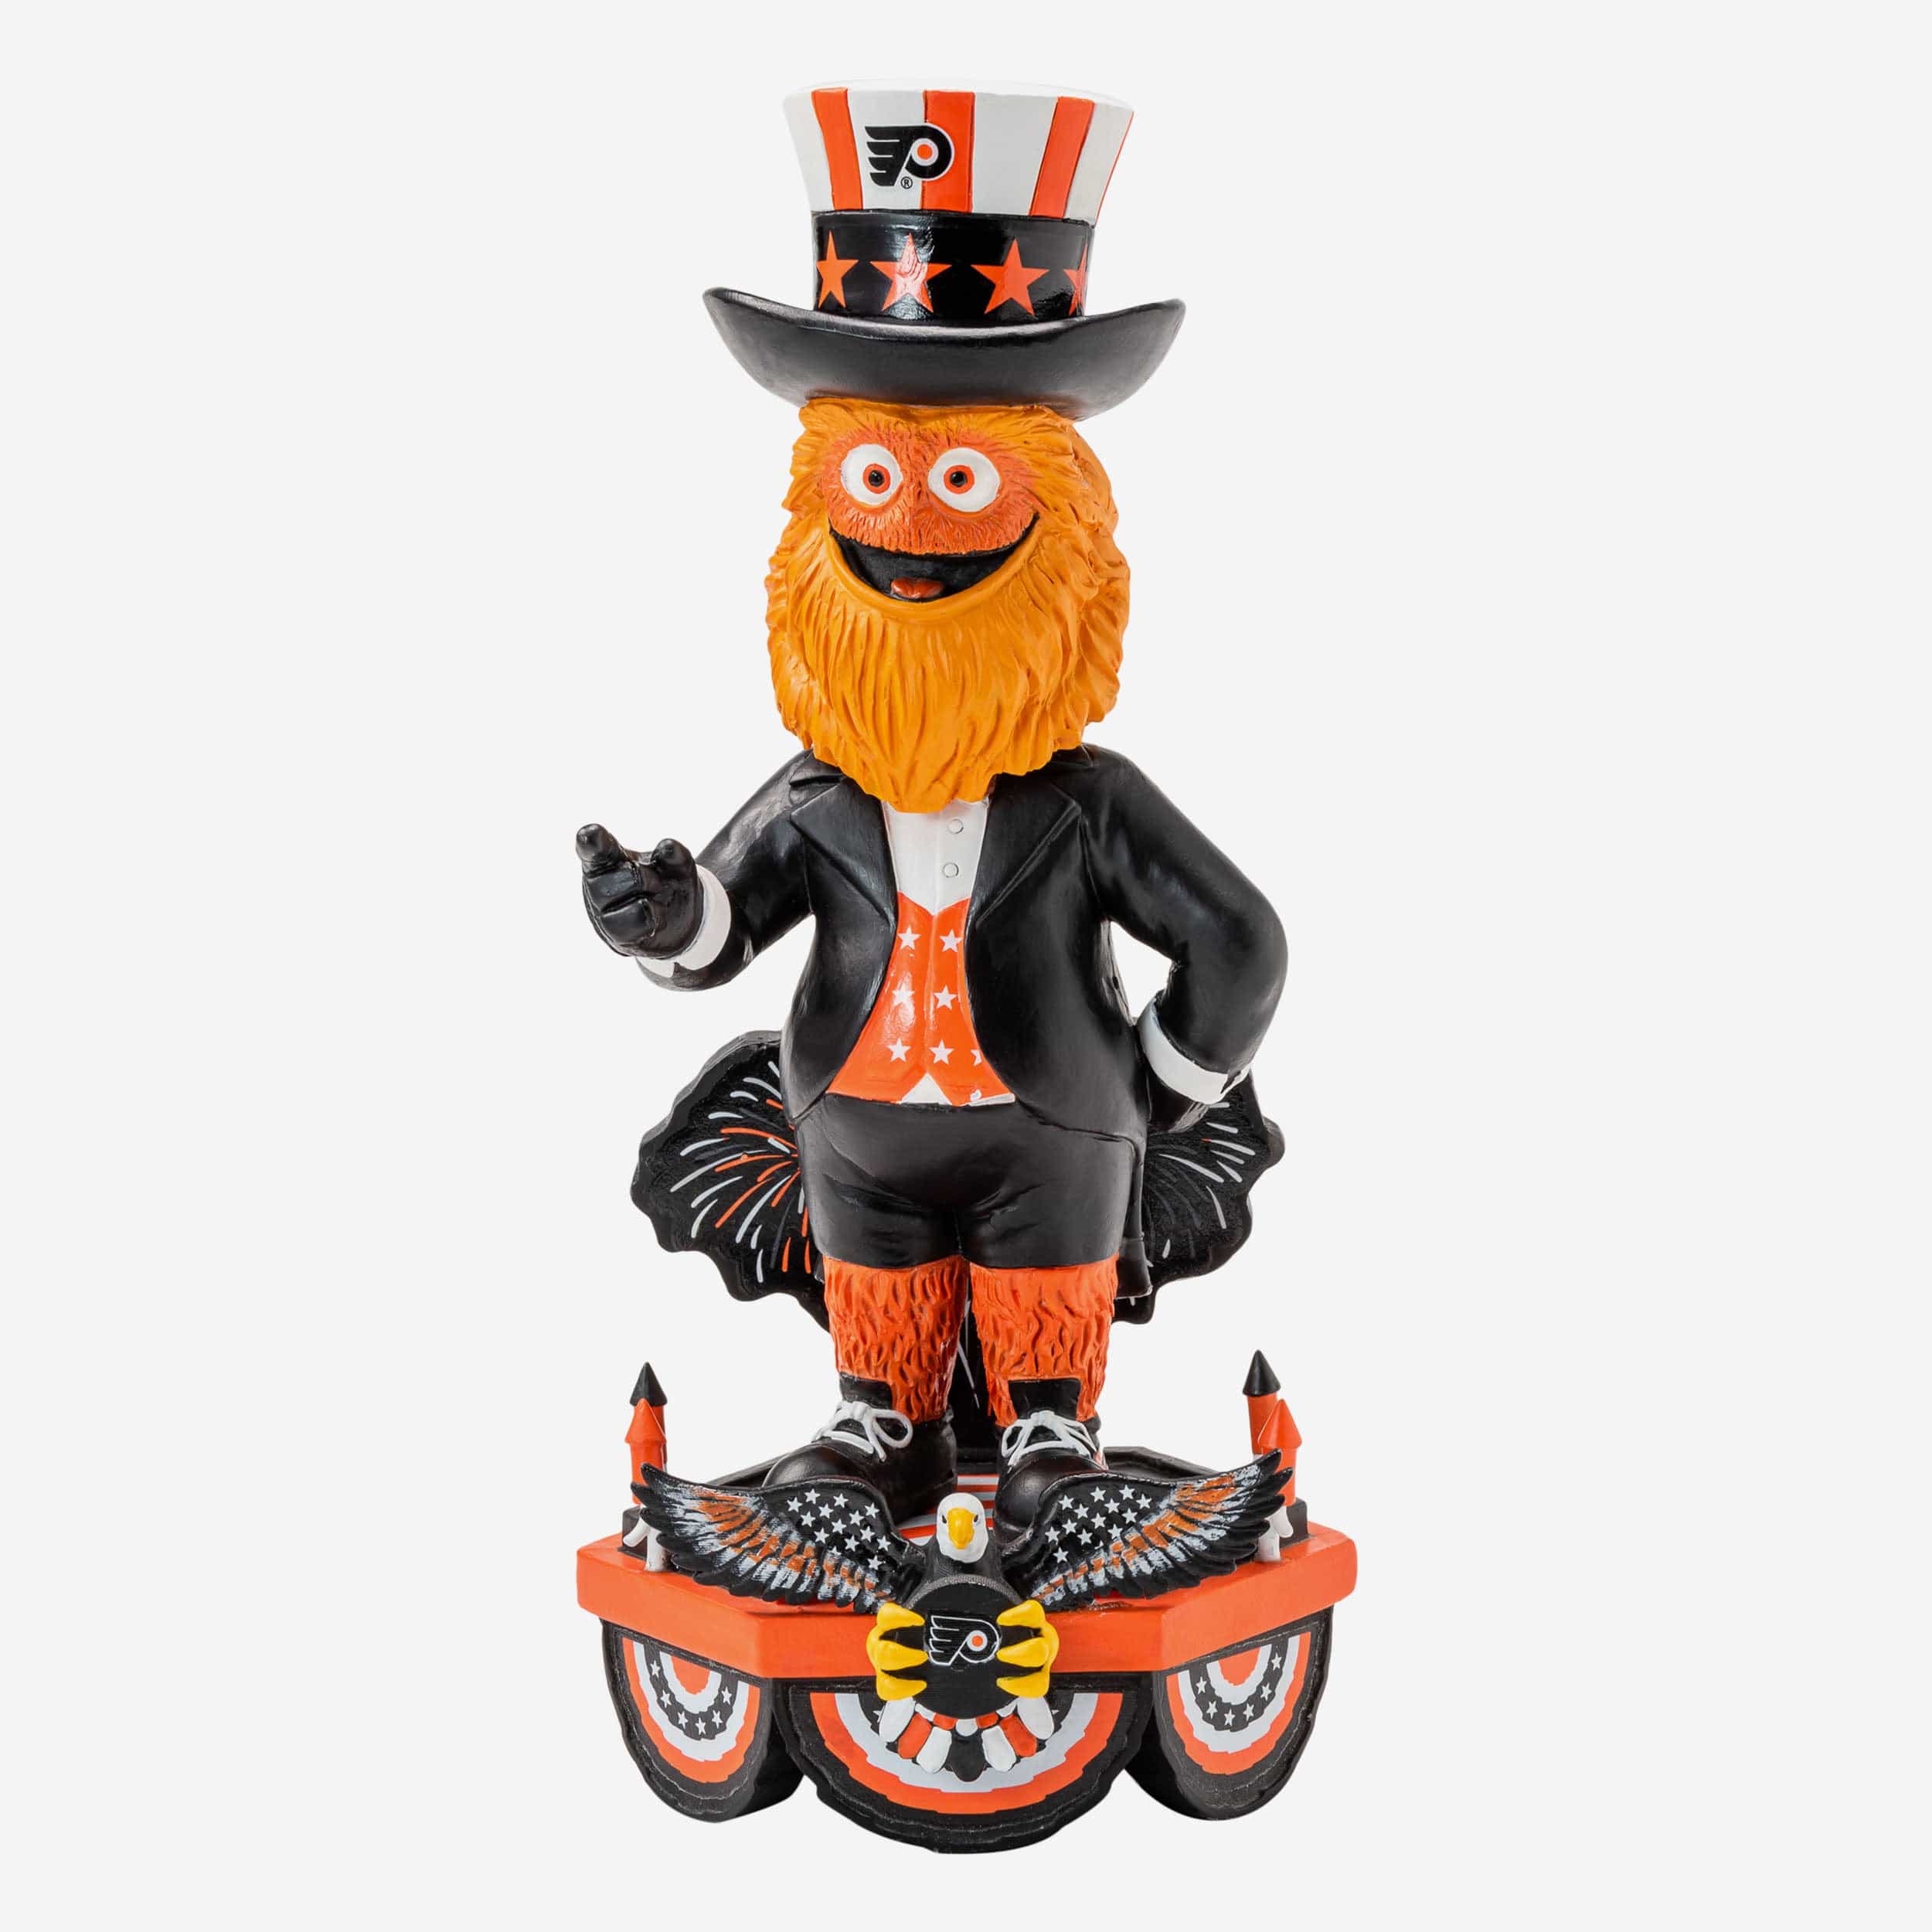 Philadelphia Flyers Gritty Mascot Bobblehead - Collectible Bobbleheads by  Kollectico